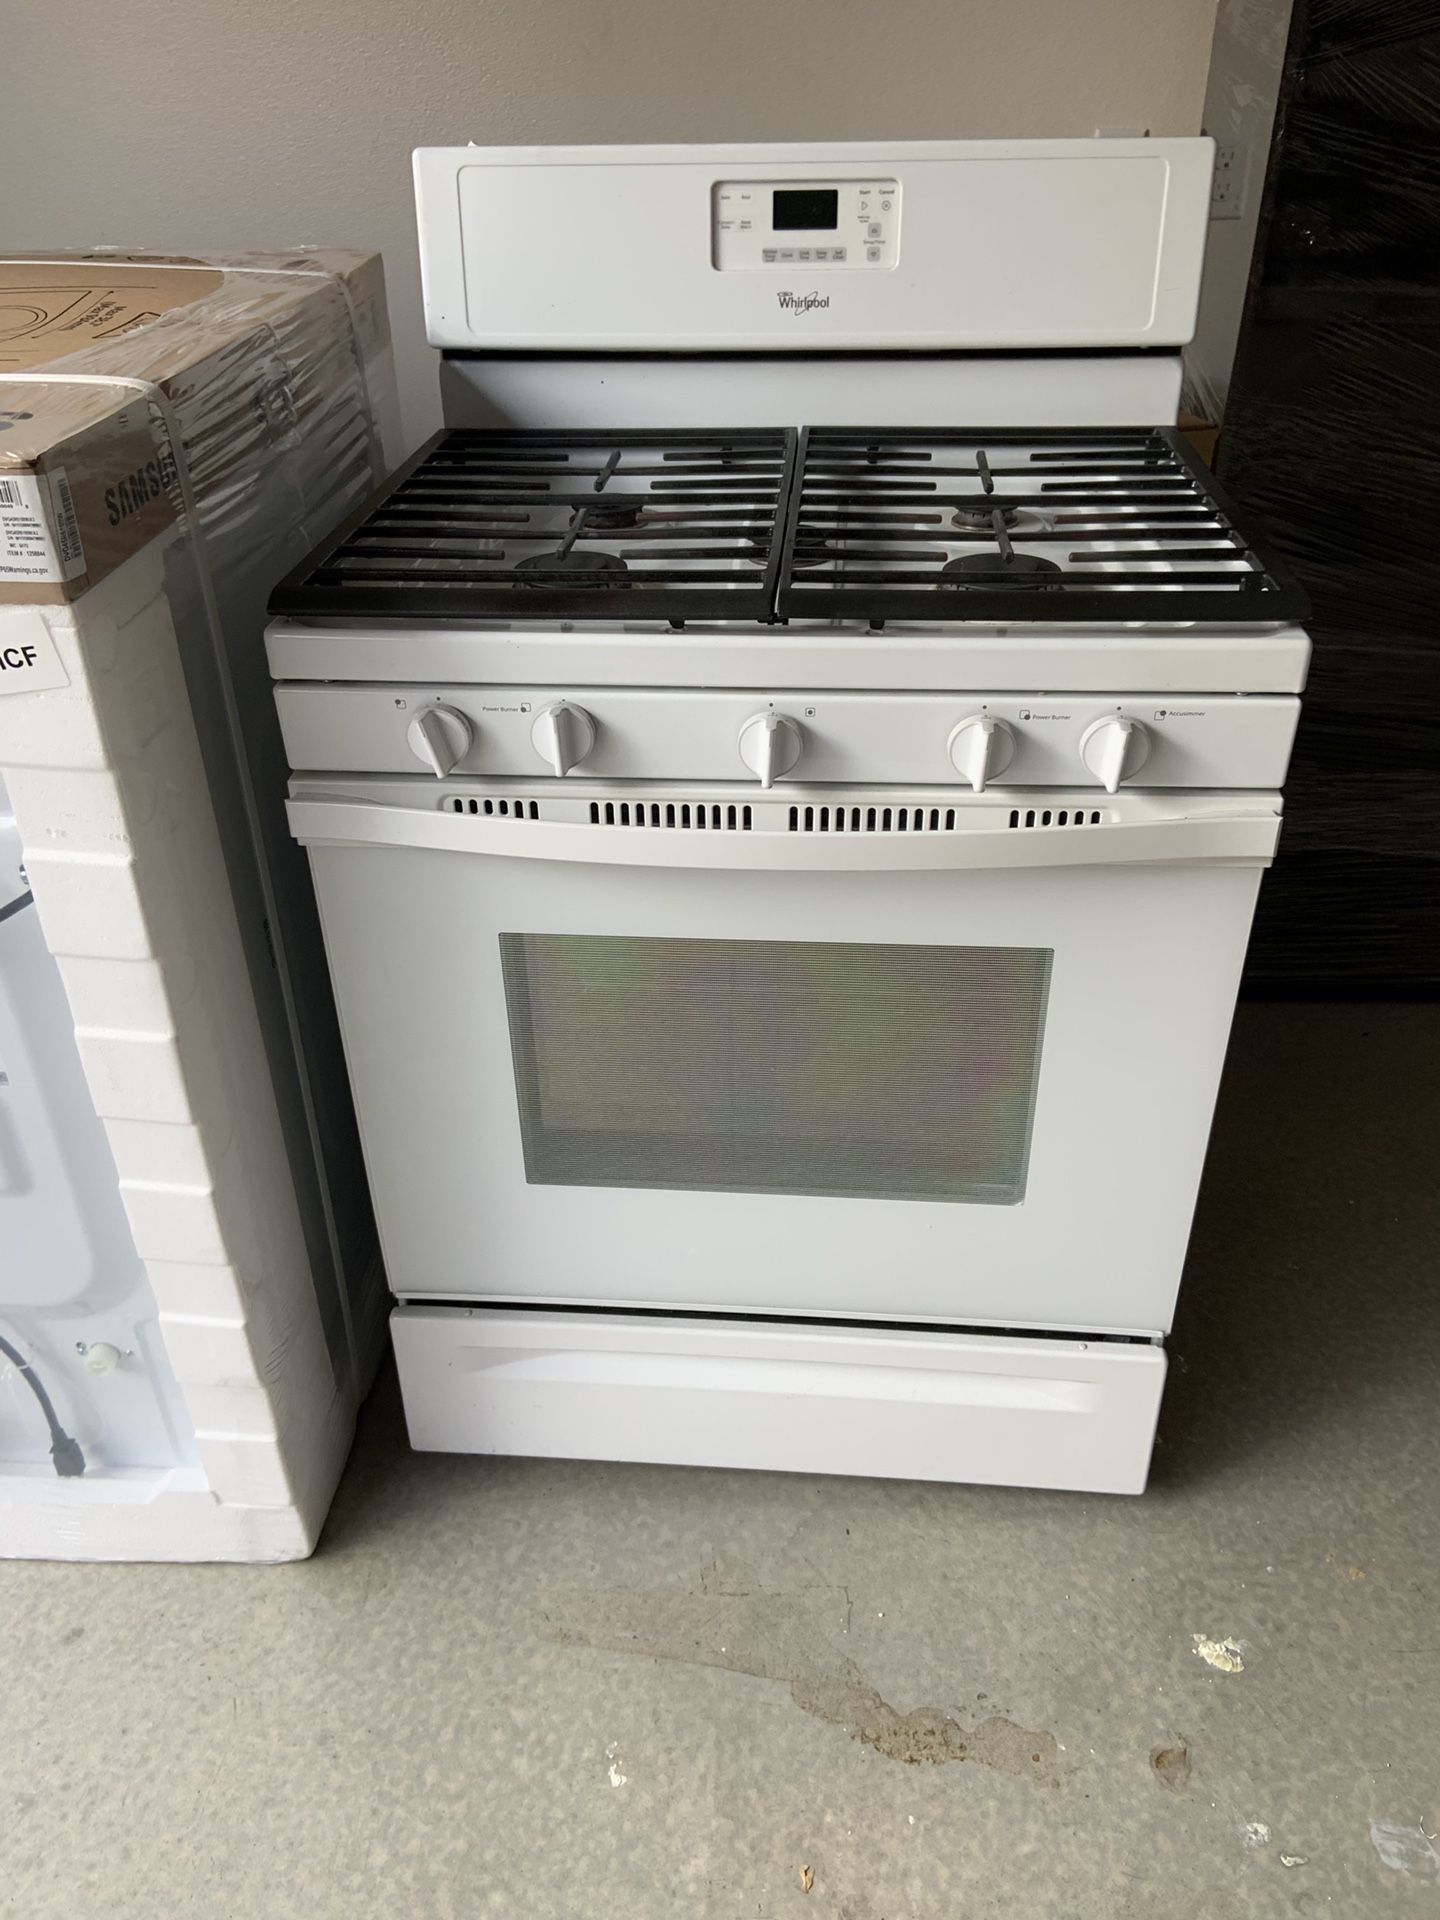 Whirlpool white Stove, Dishwasher and Over the range Microwave for Sale!